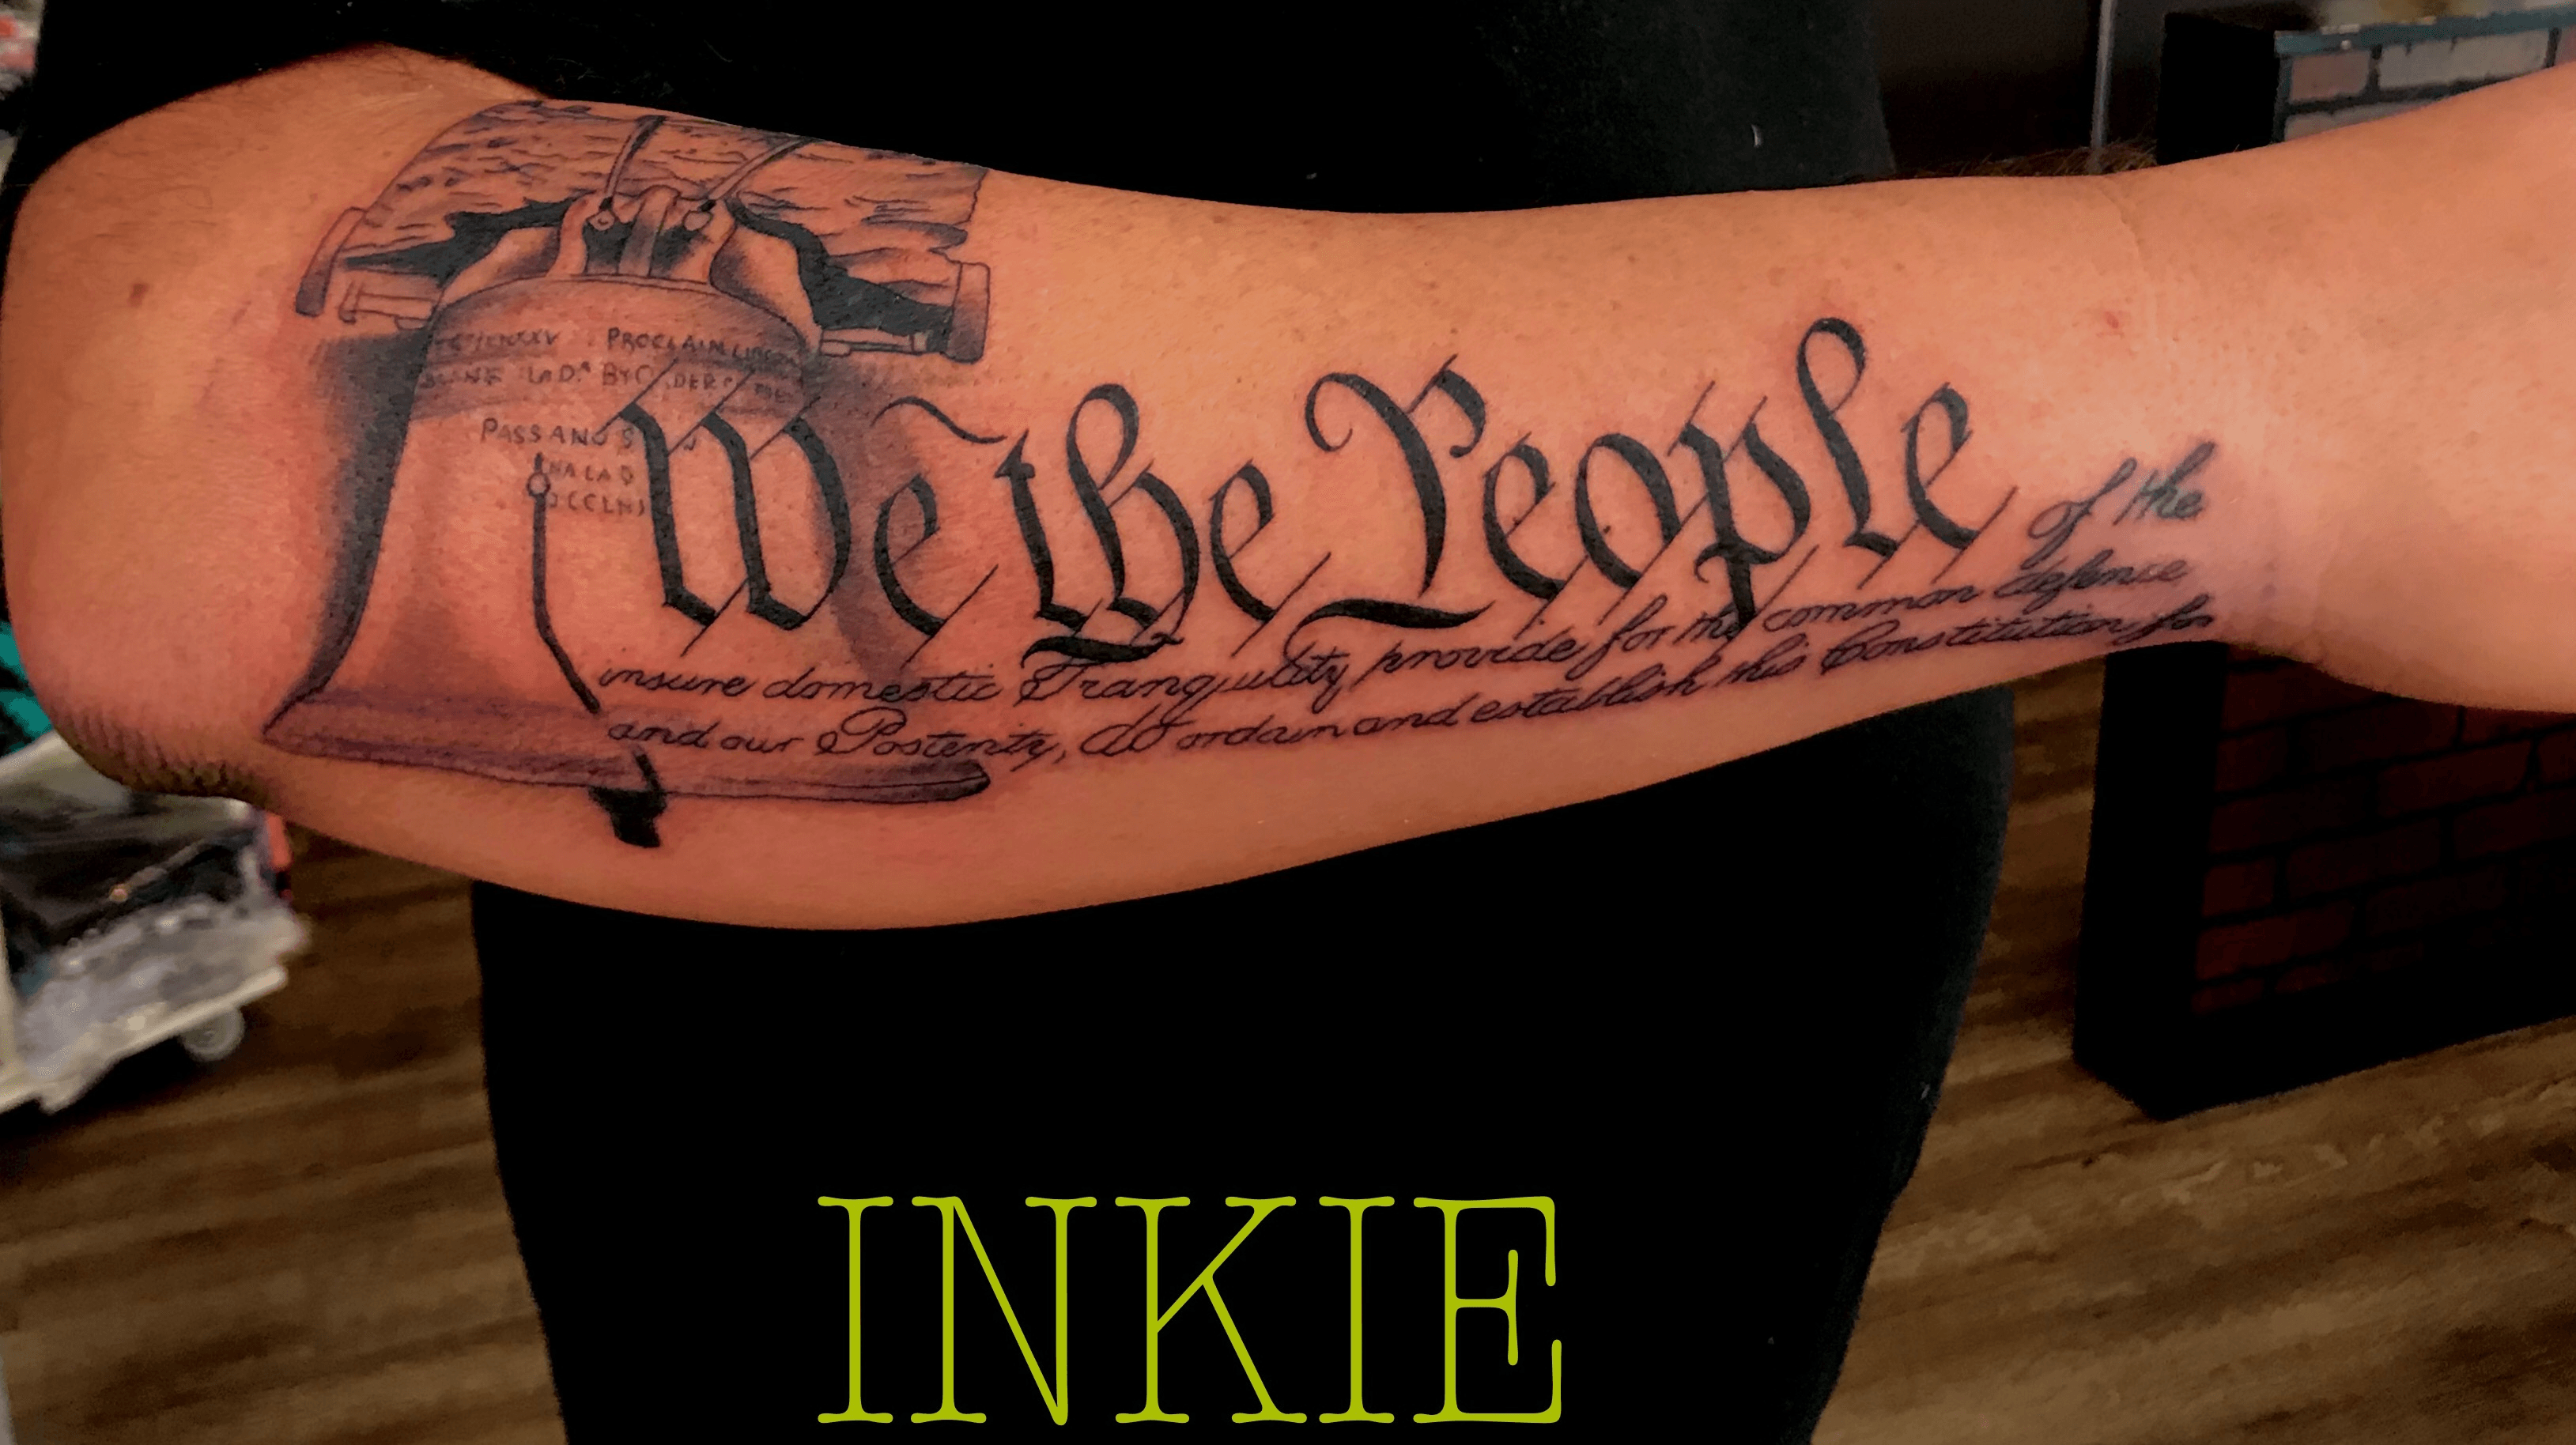 The tattoo We The People from the United States Constitution decorates  the arm of Trump supporter Bob Lewis left as he argues with counter  protester Ralph Gaines as Trump supporters demonstrate against